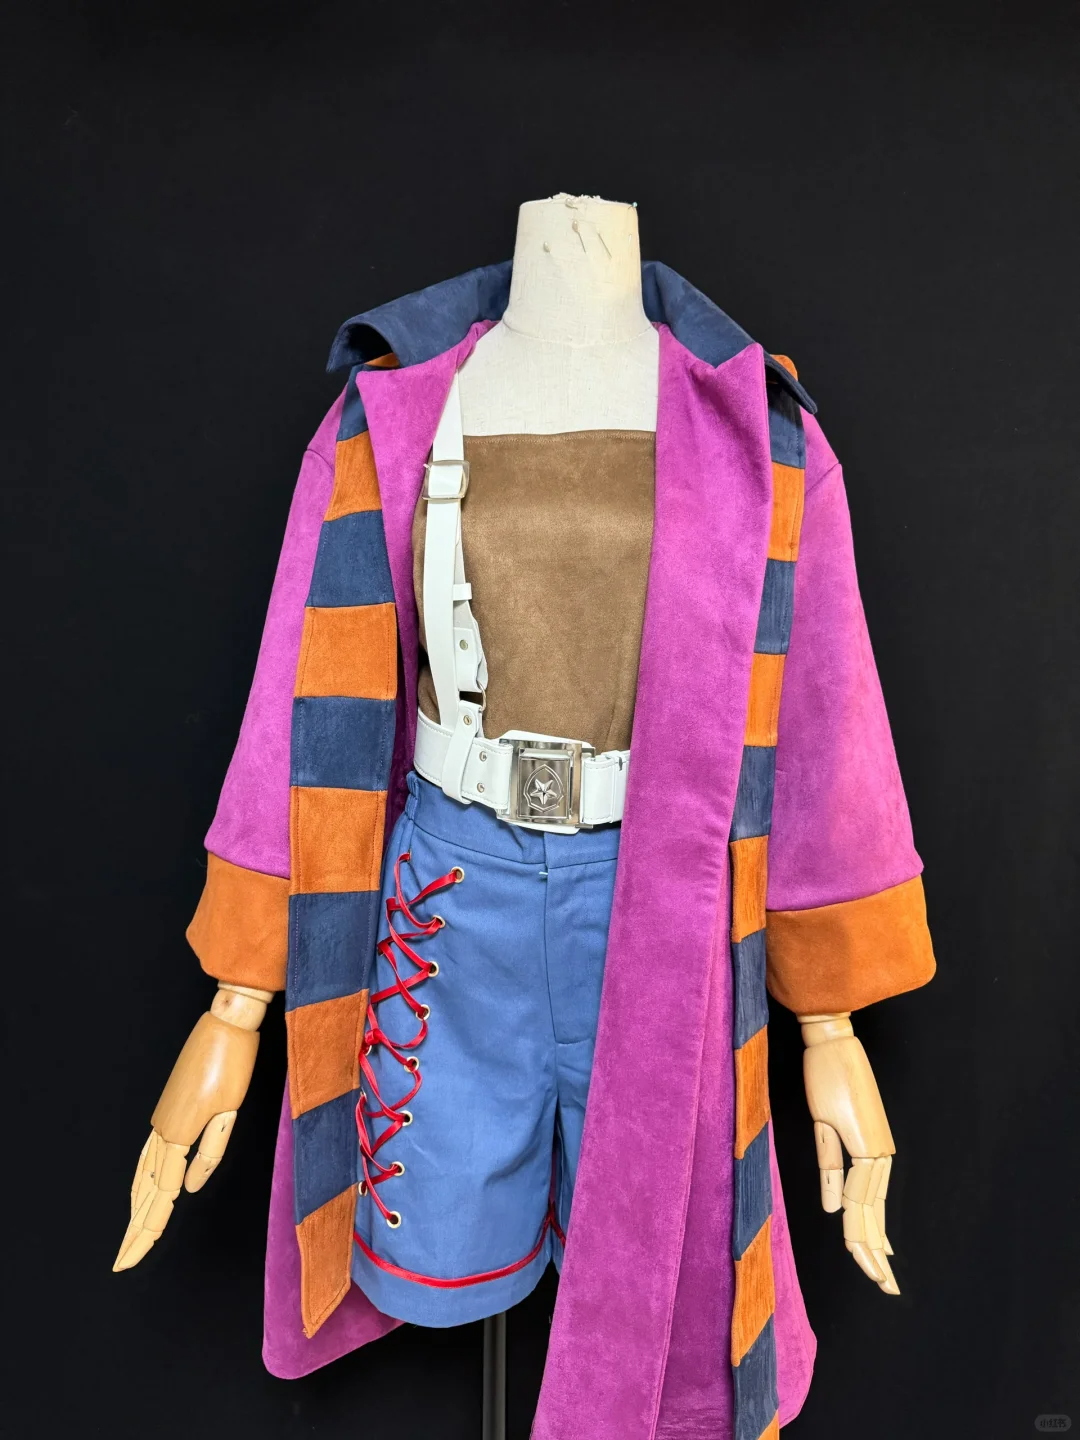 Hachimicos Fate Grand Order FGO Christopher Columbus Cosplay Costume From Hachimicos